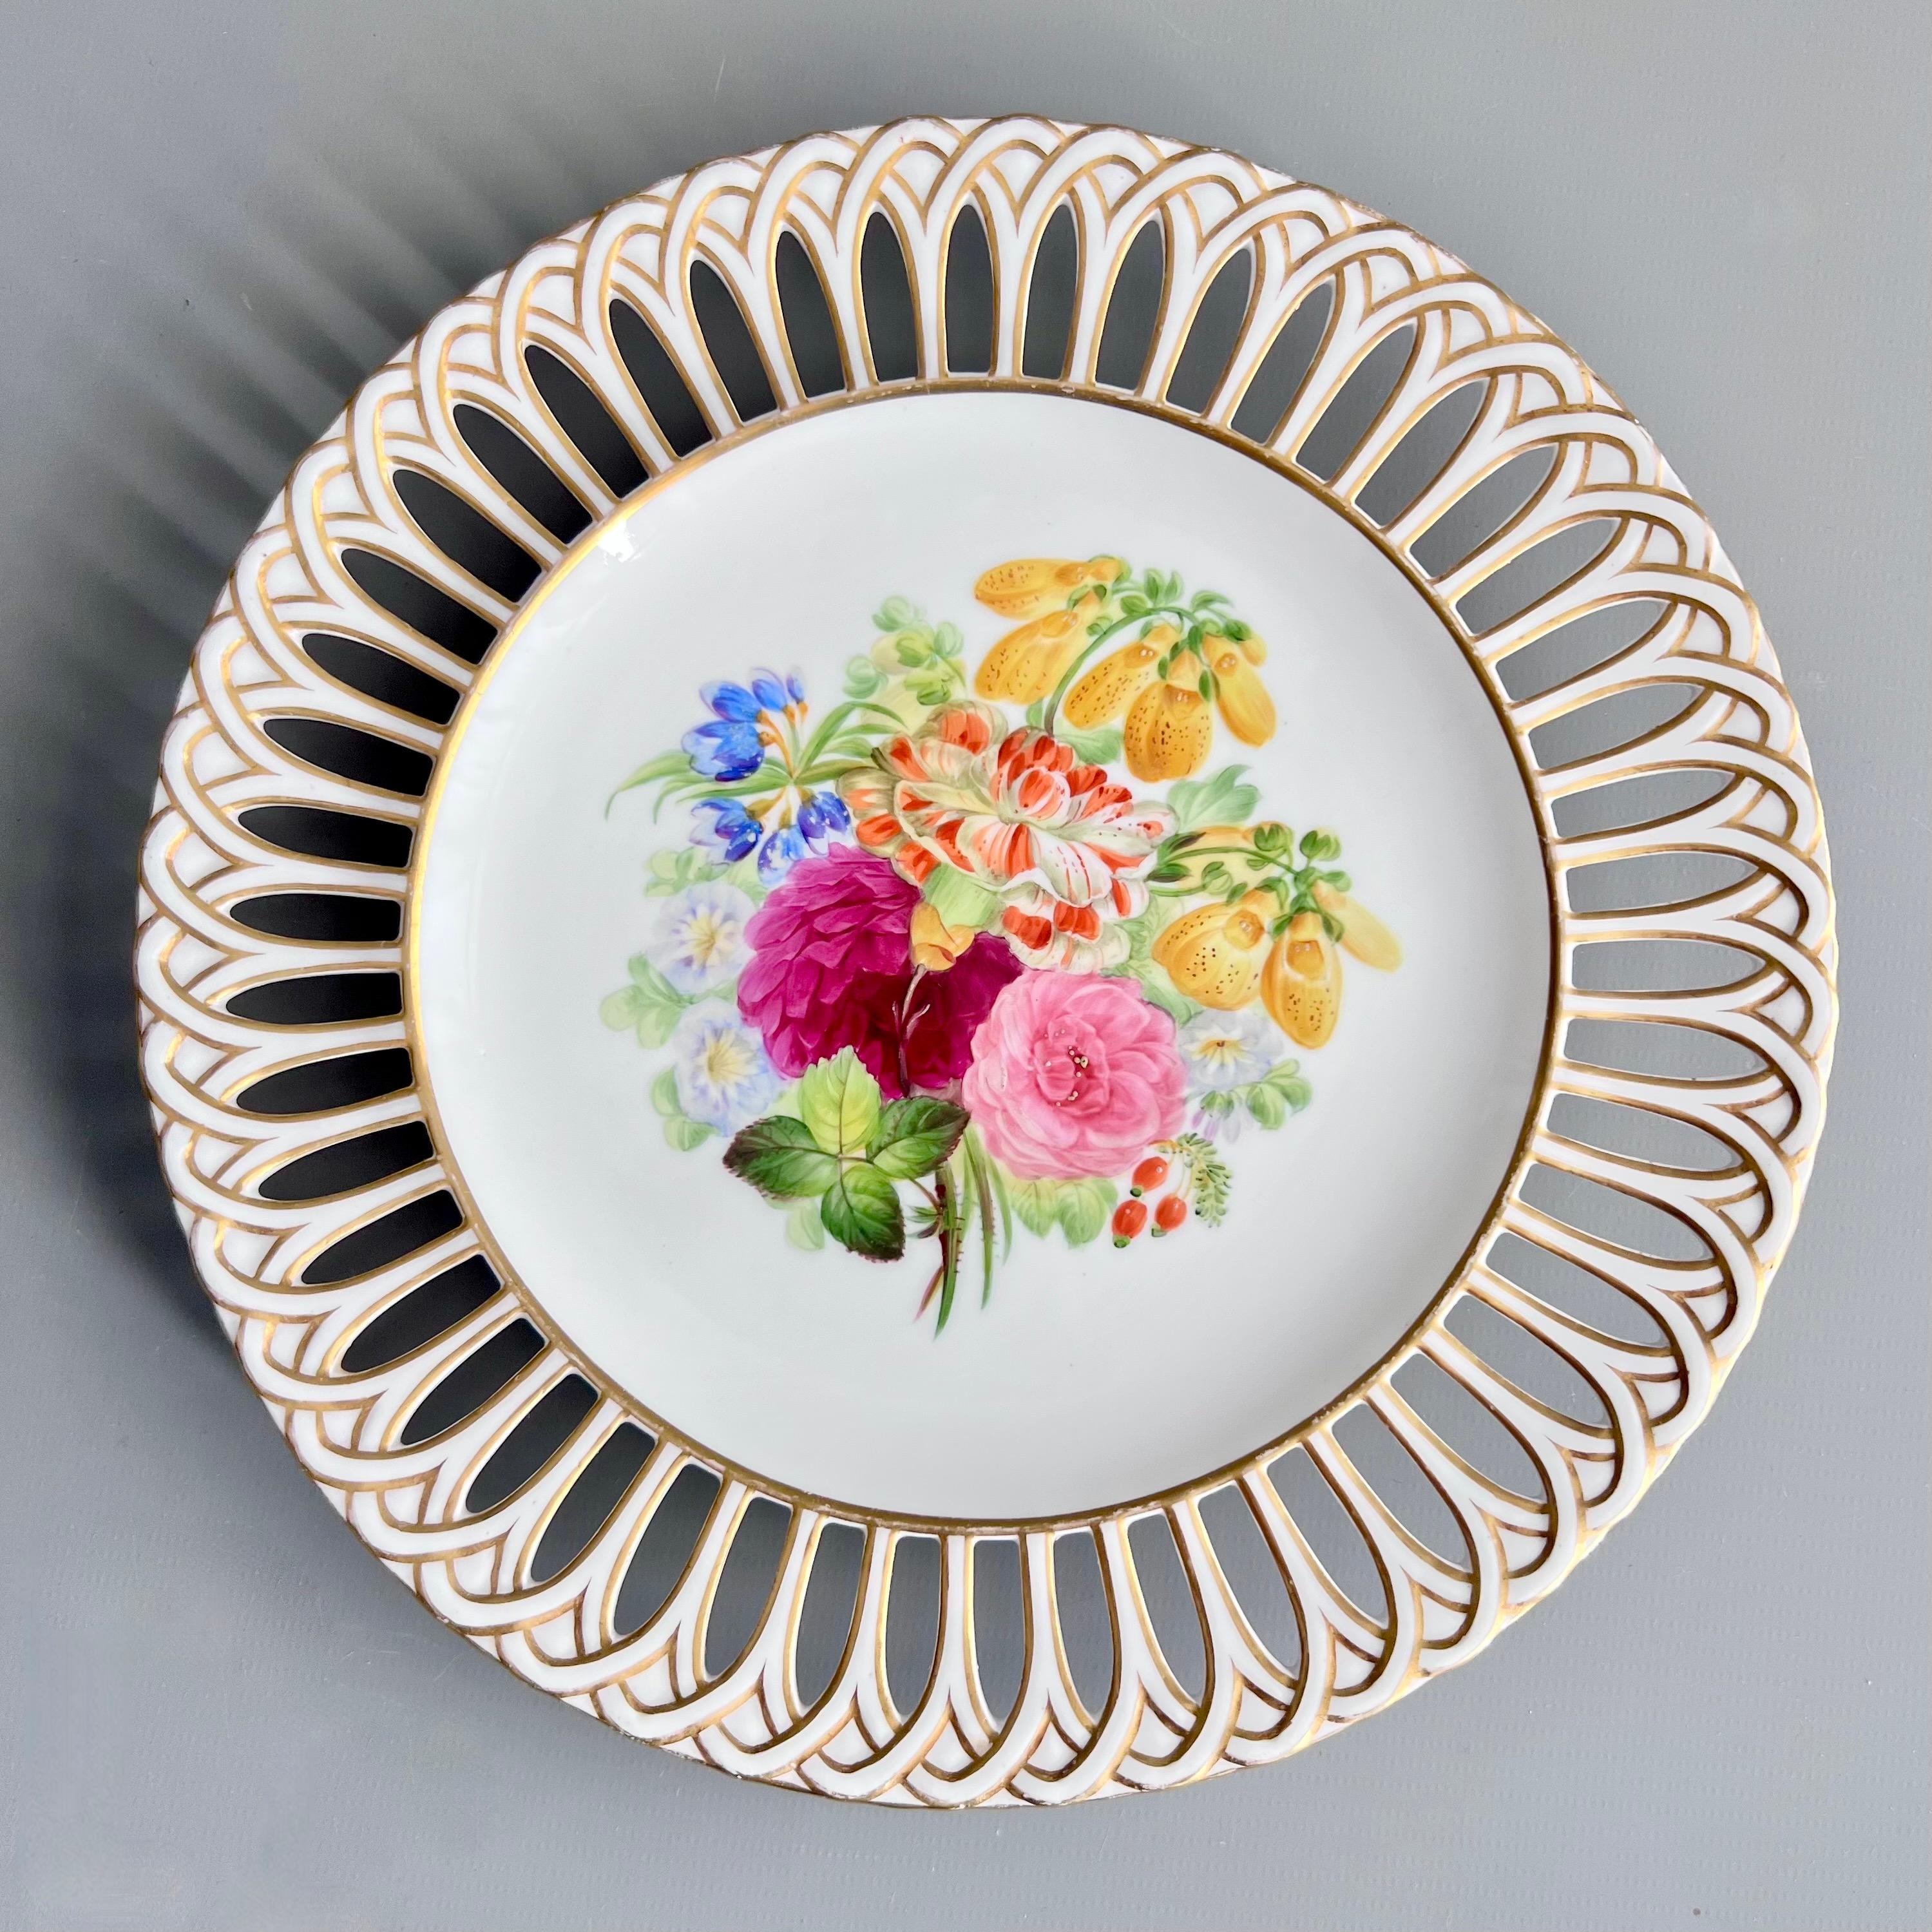 Set of 8 Plates by Copeland, Reticulated, Sublime Flowers by Greatbatch, 1848 In Good Condition For Sale In London, GB